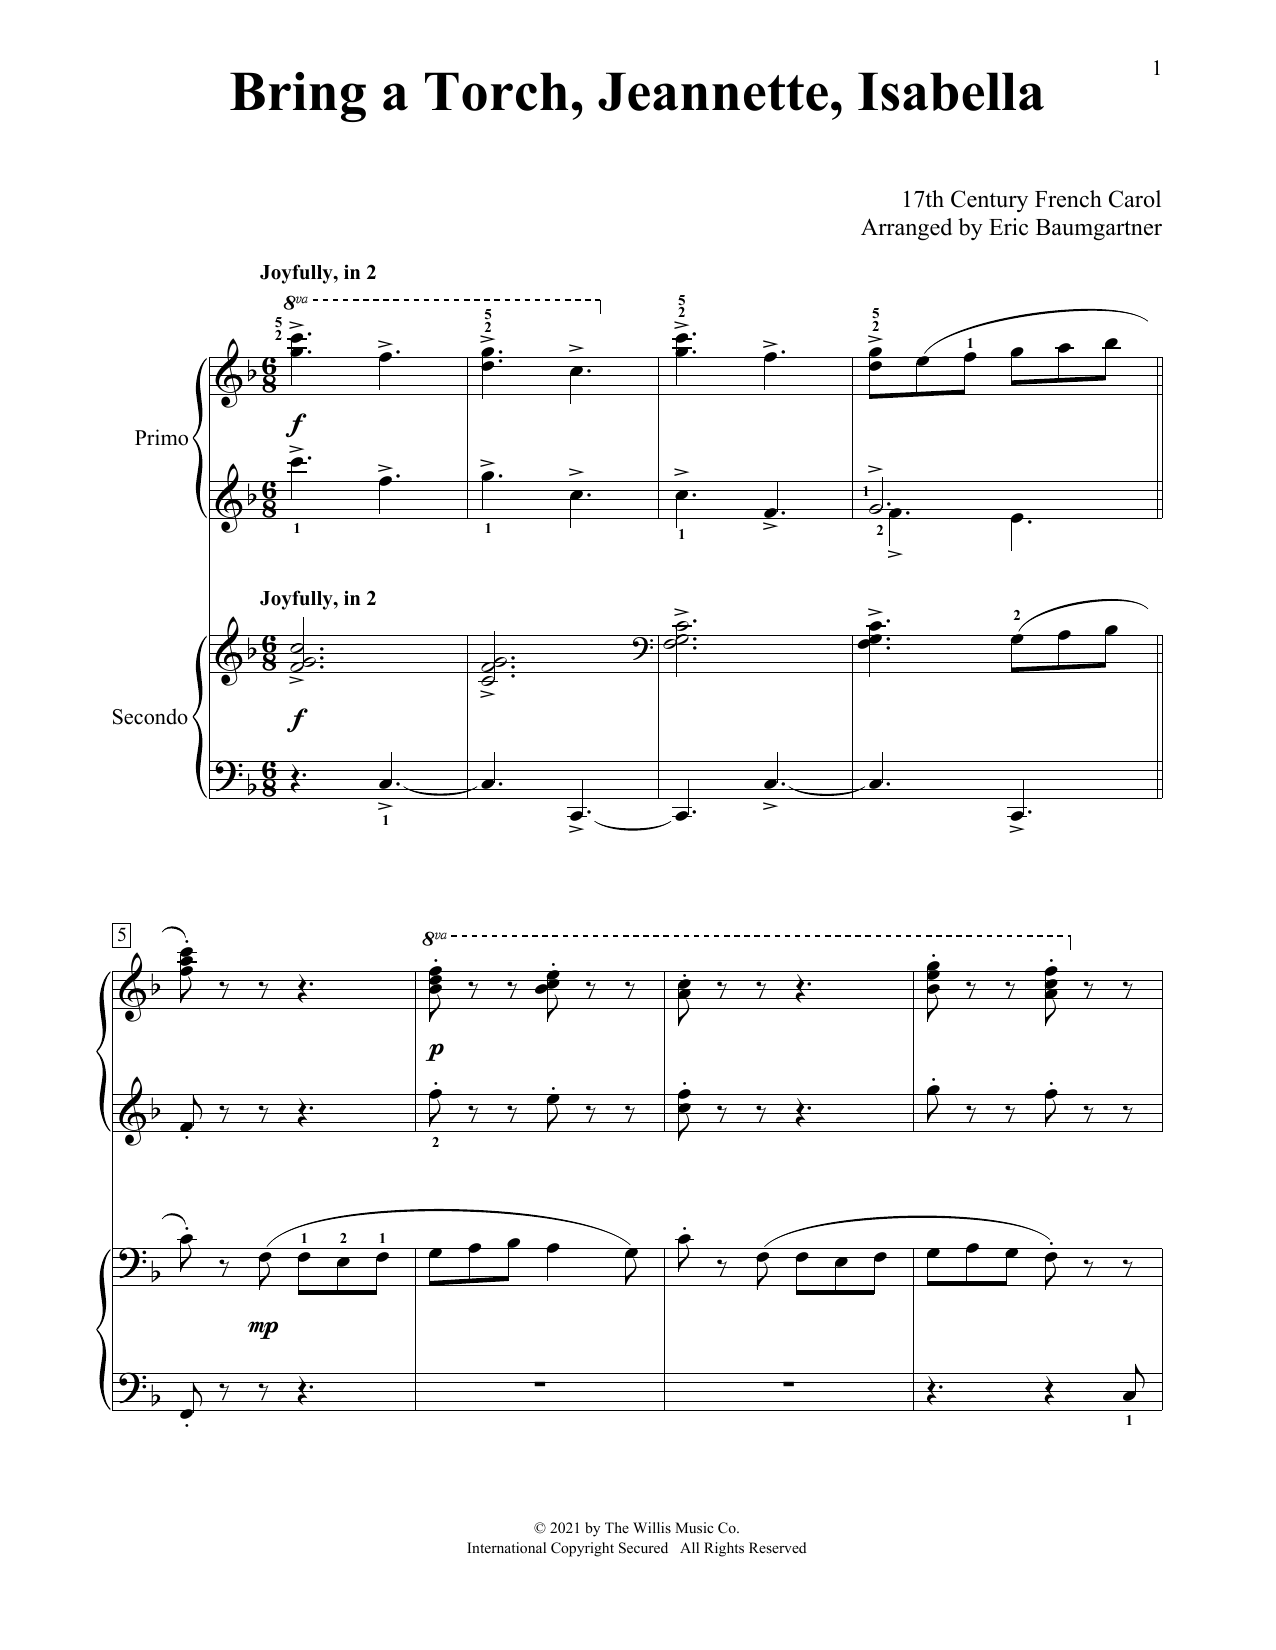 17th Century French Carol Bring A Torch, Jeannette, Isabella (arr. Eric Baumgartner) sheet music notes and chords. Download Printable PDF.